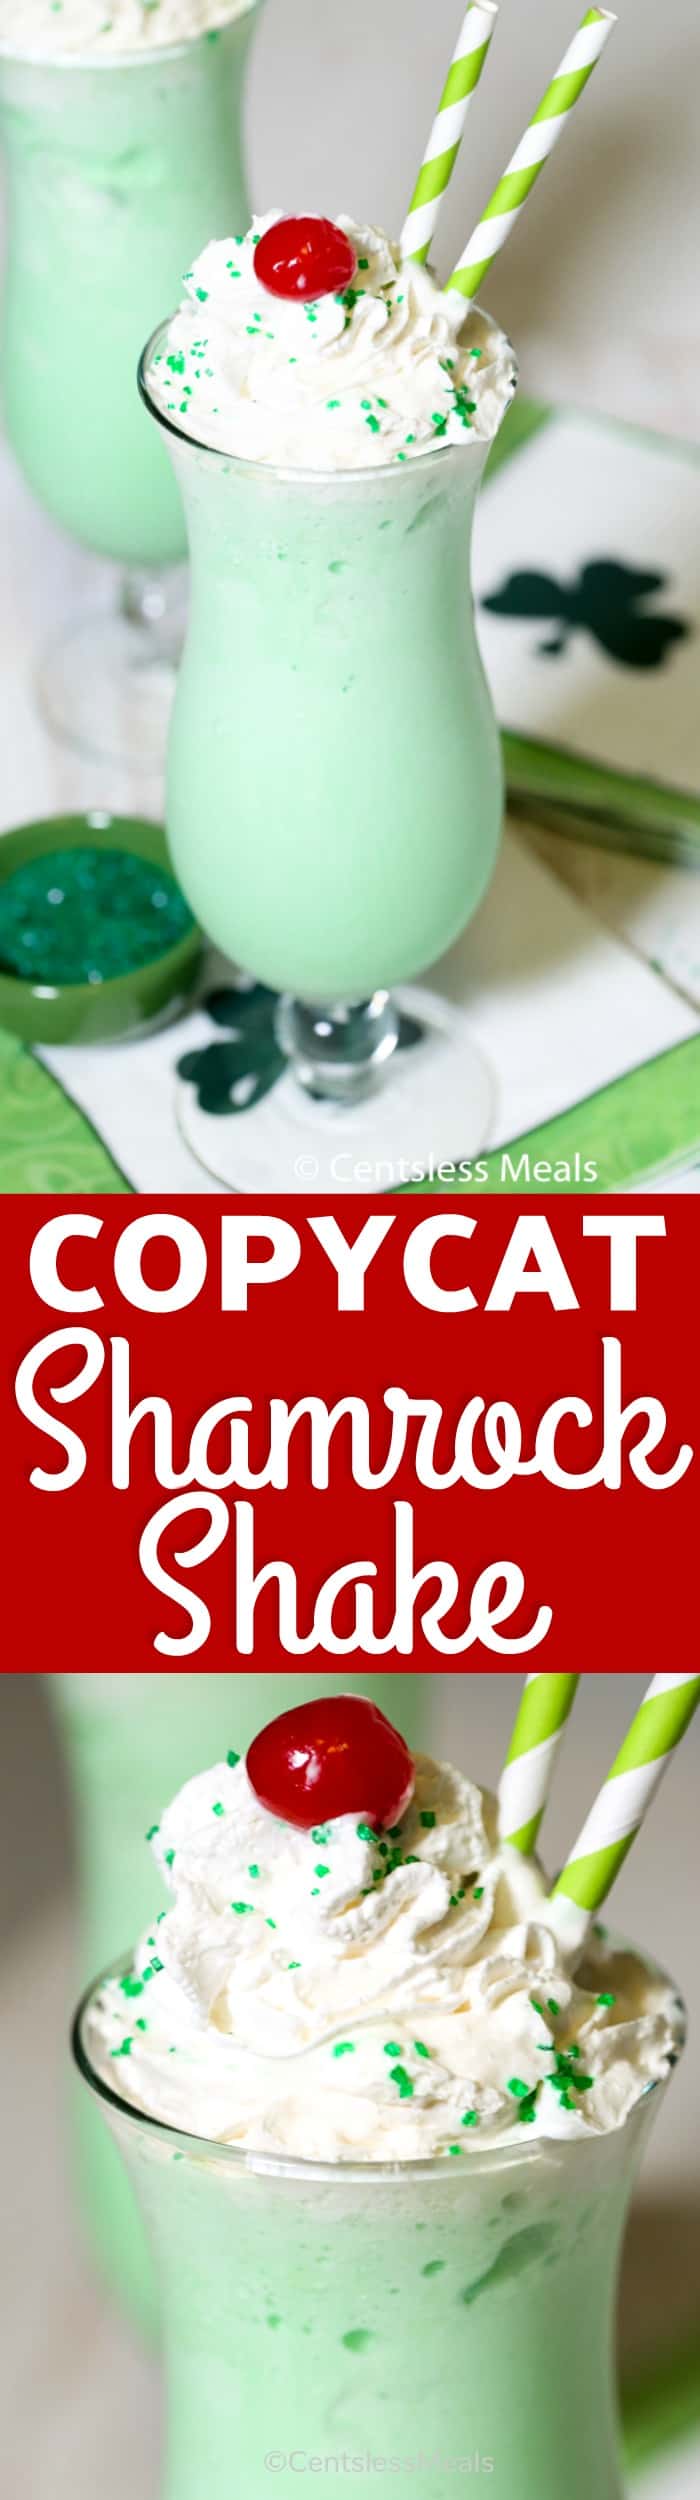 Shamrock Shake in a glass with a title